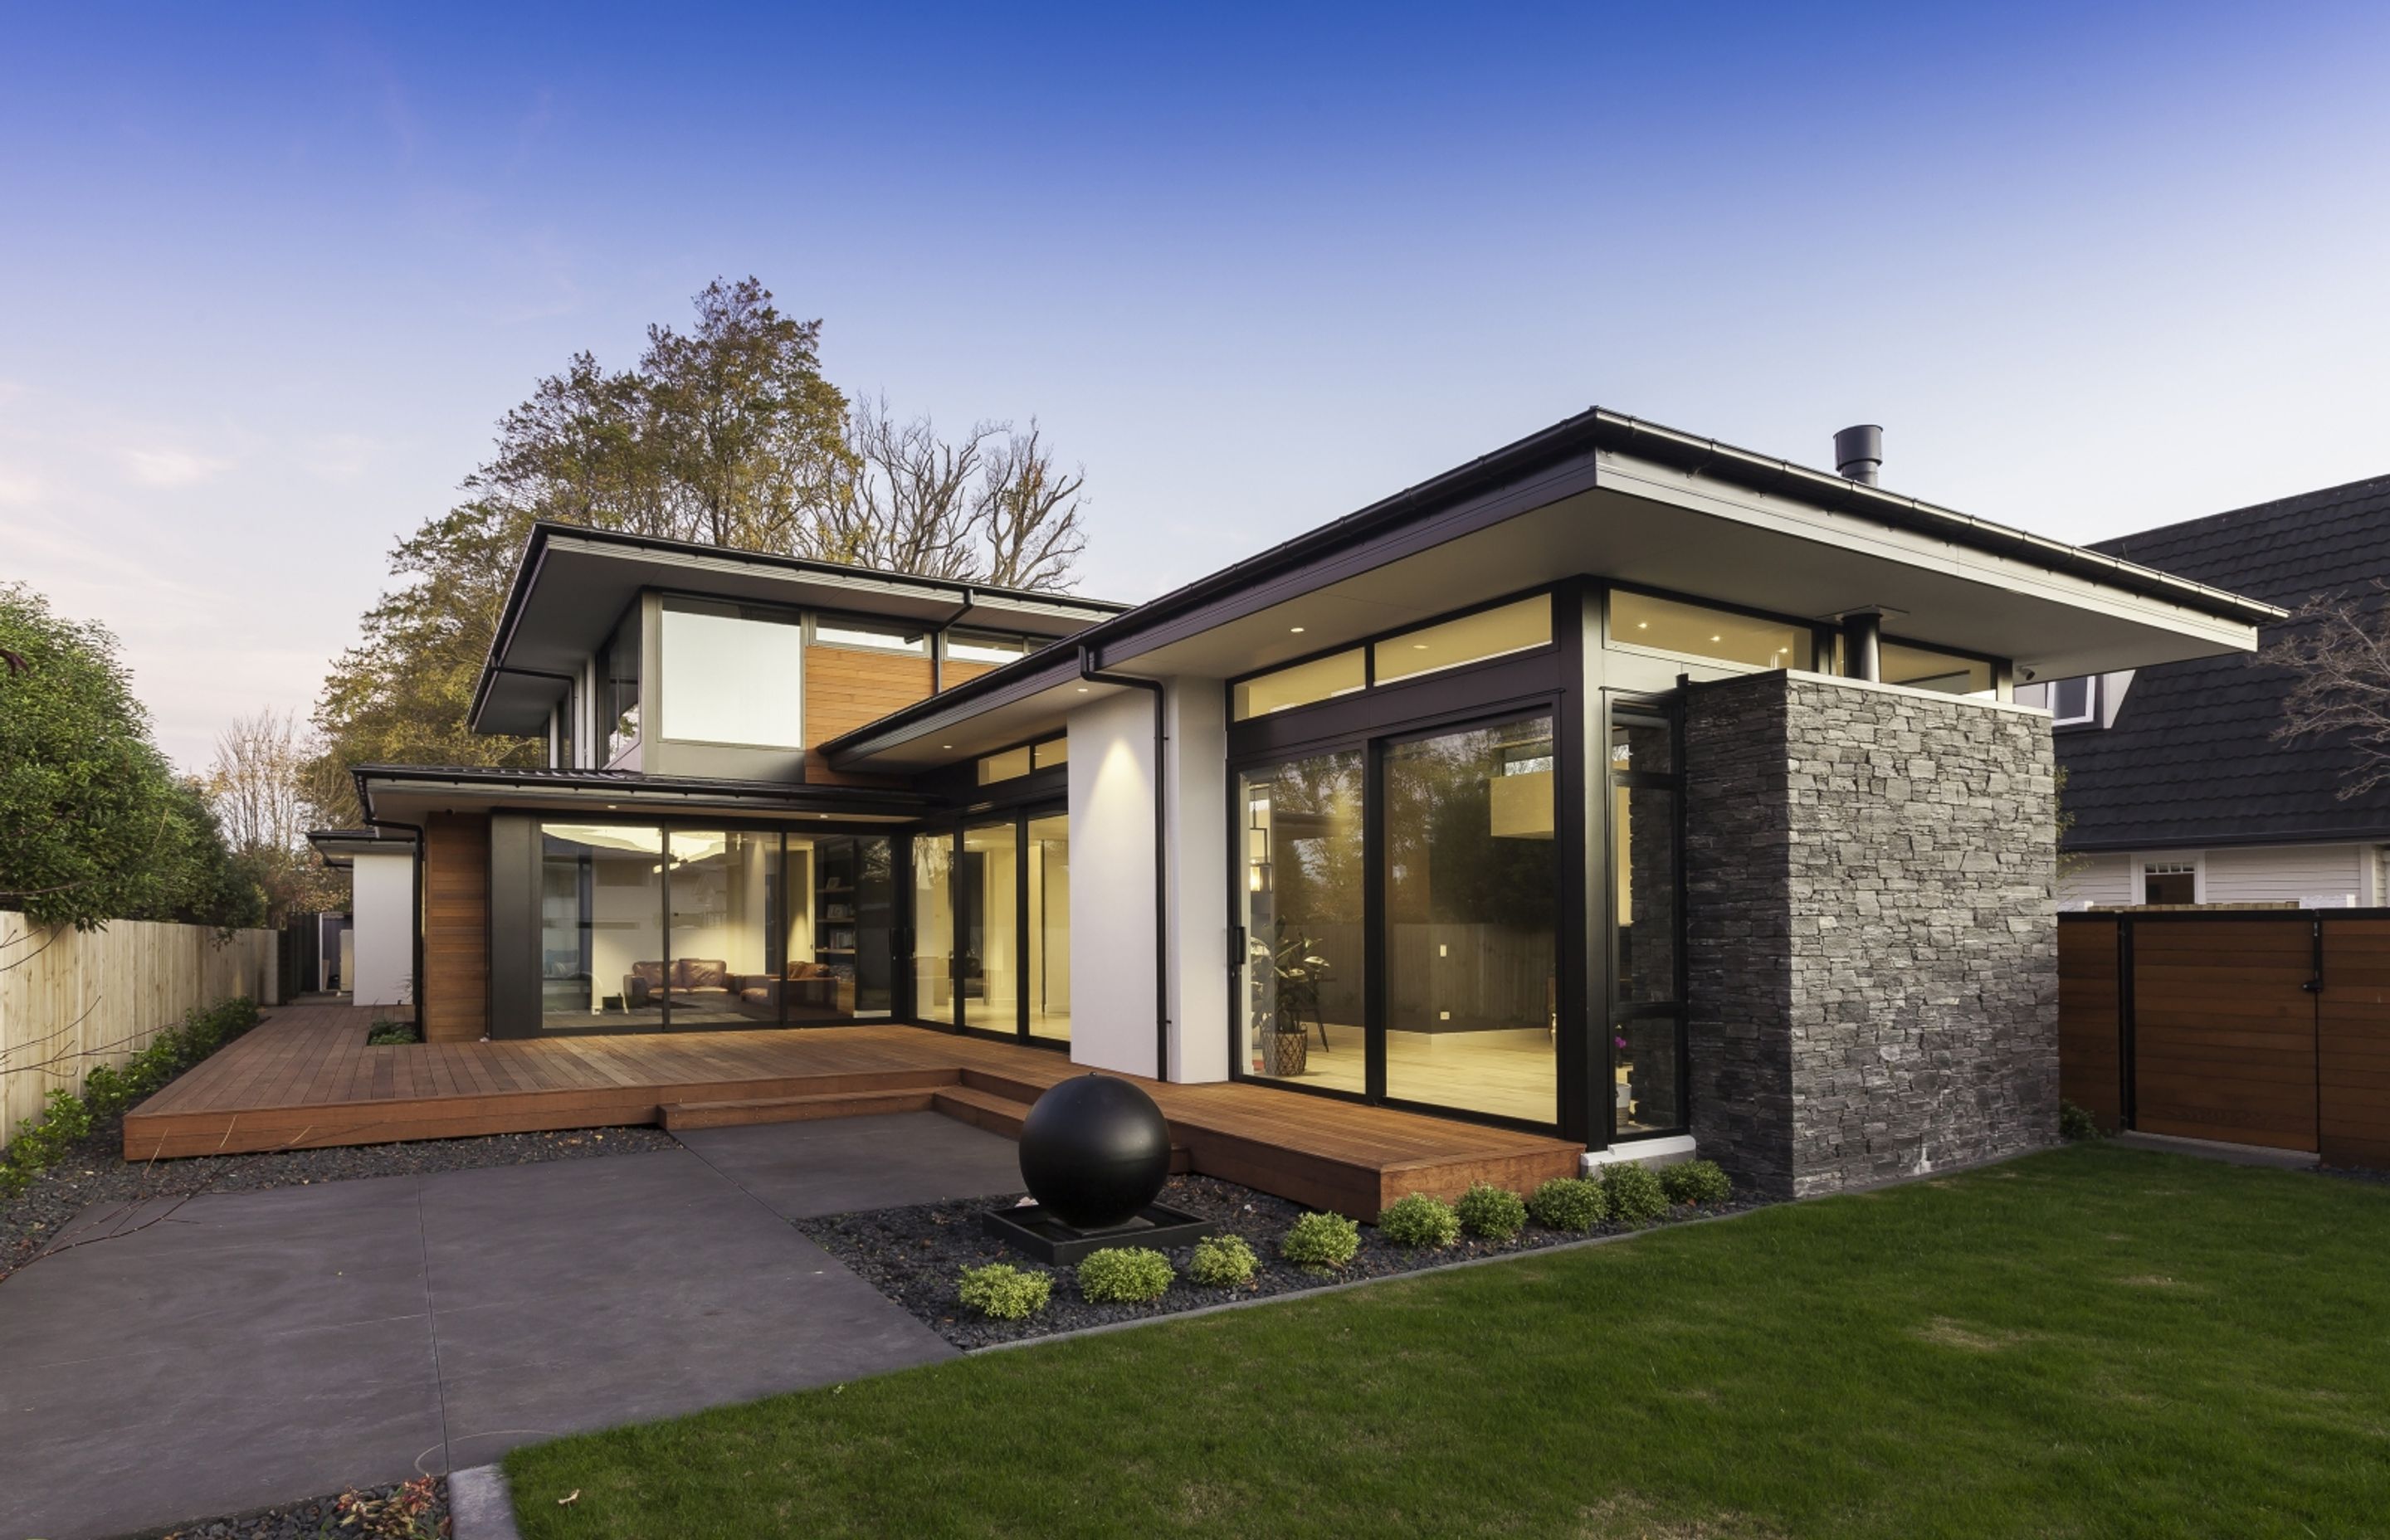 This new home in Christchurch has replaced a home that was damaged in the earthquakes. As the property is located in a TC3 zone, the house features a RibRaft slab, allowing it to be easily relevelled in the event of liquefaction.